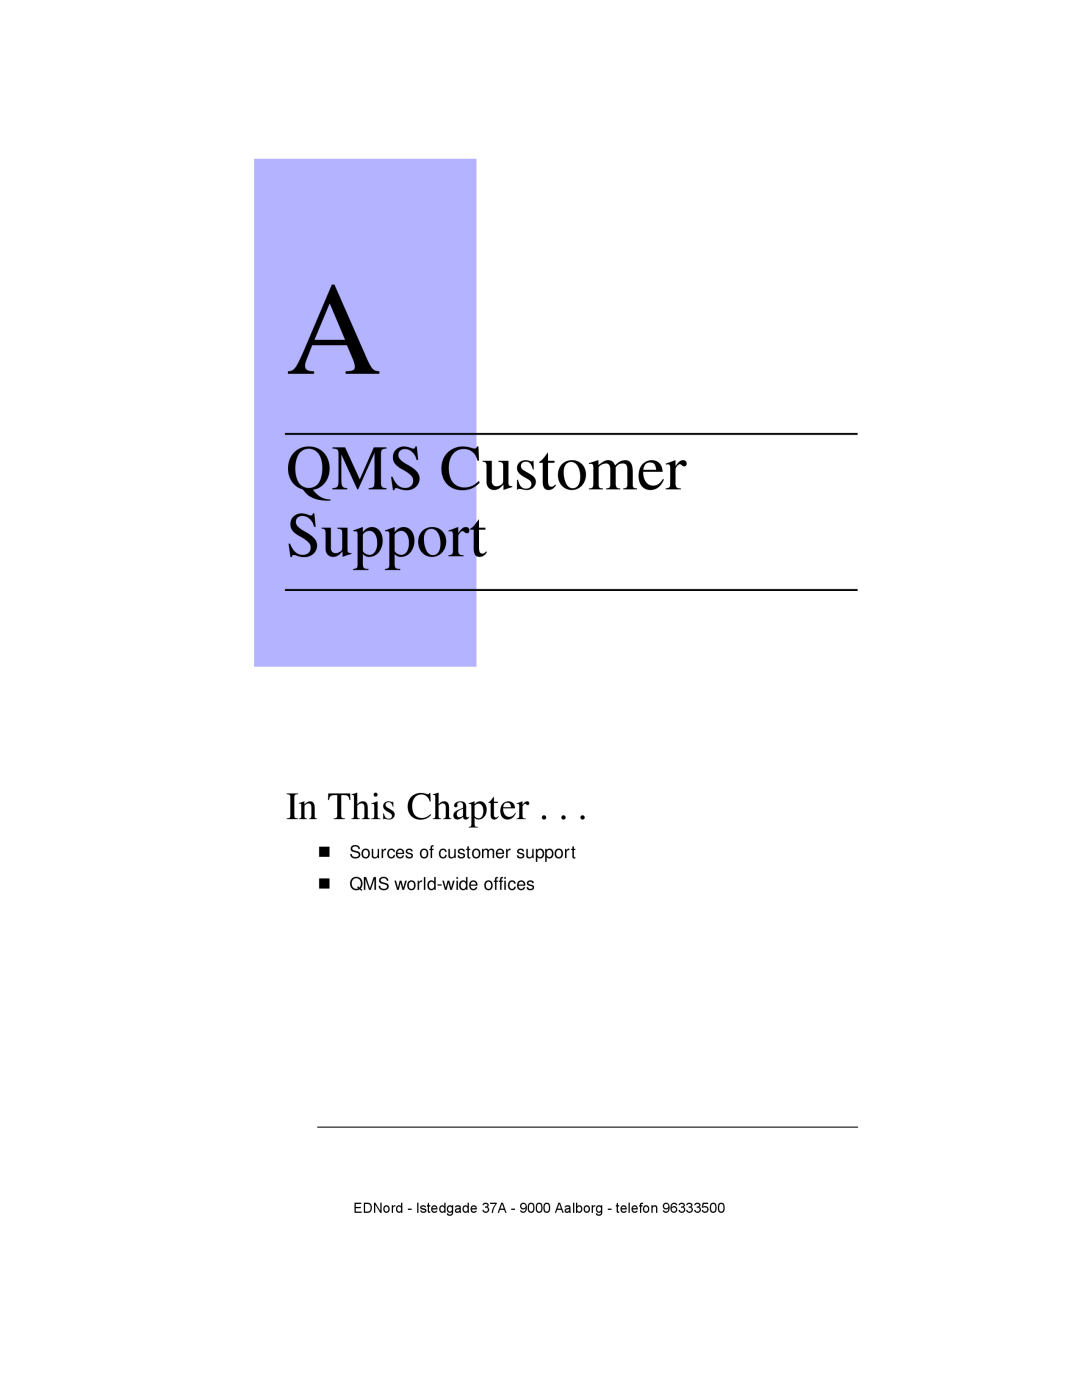 IBM QMS 4525 manual QMS Customer Support, In This Chapter, EDNord - Istedgade 37A - 9000 Aalborg - telefon 